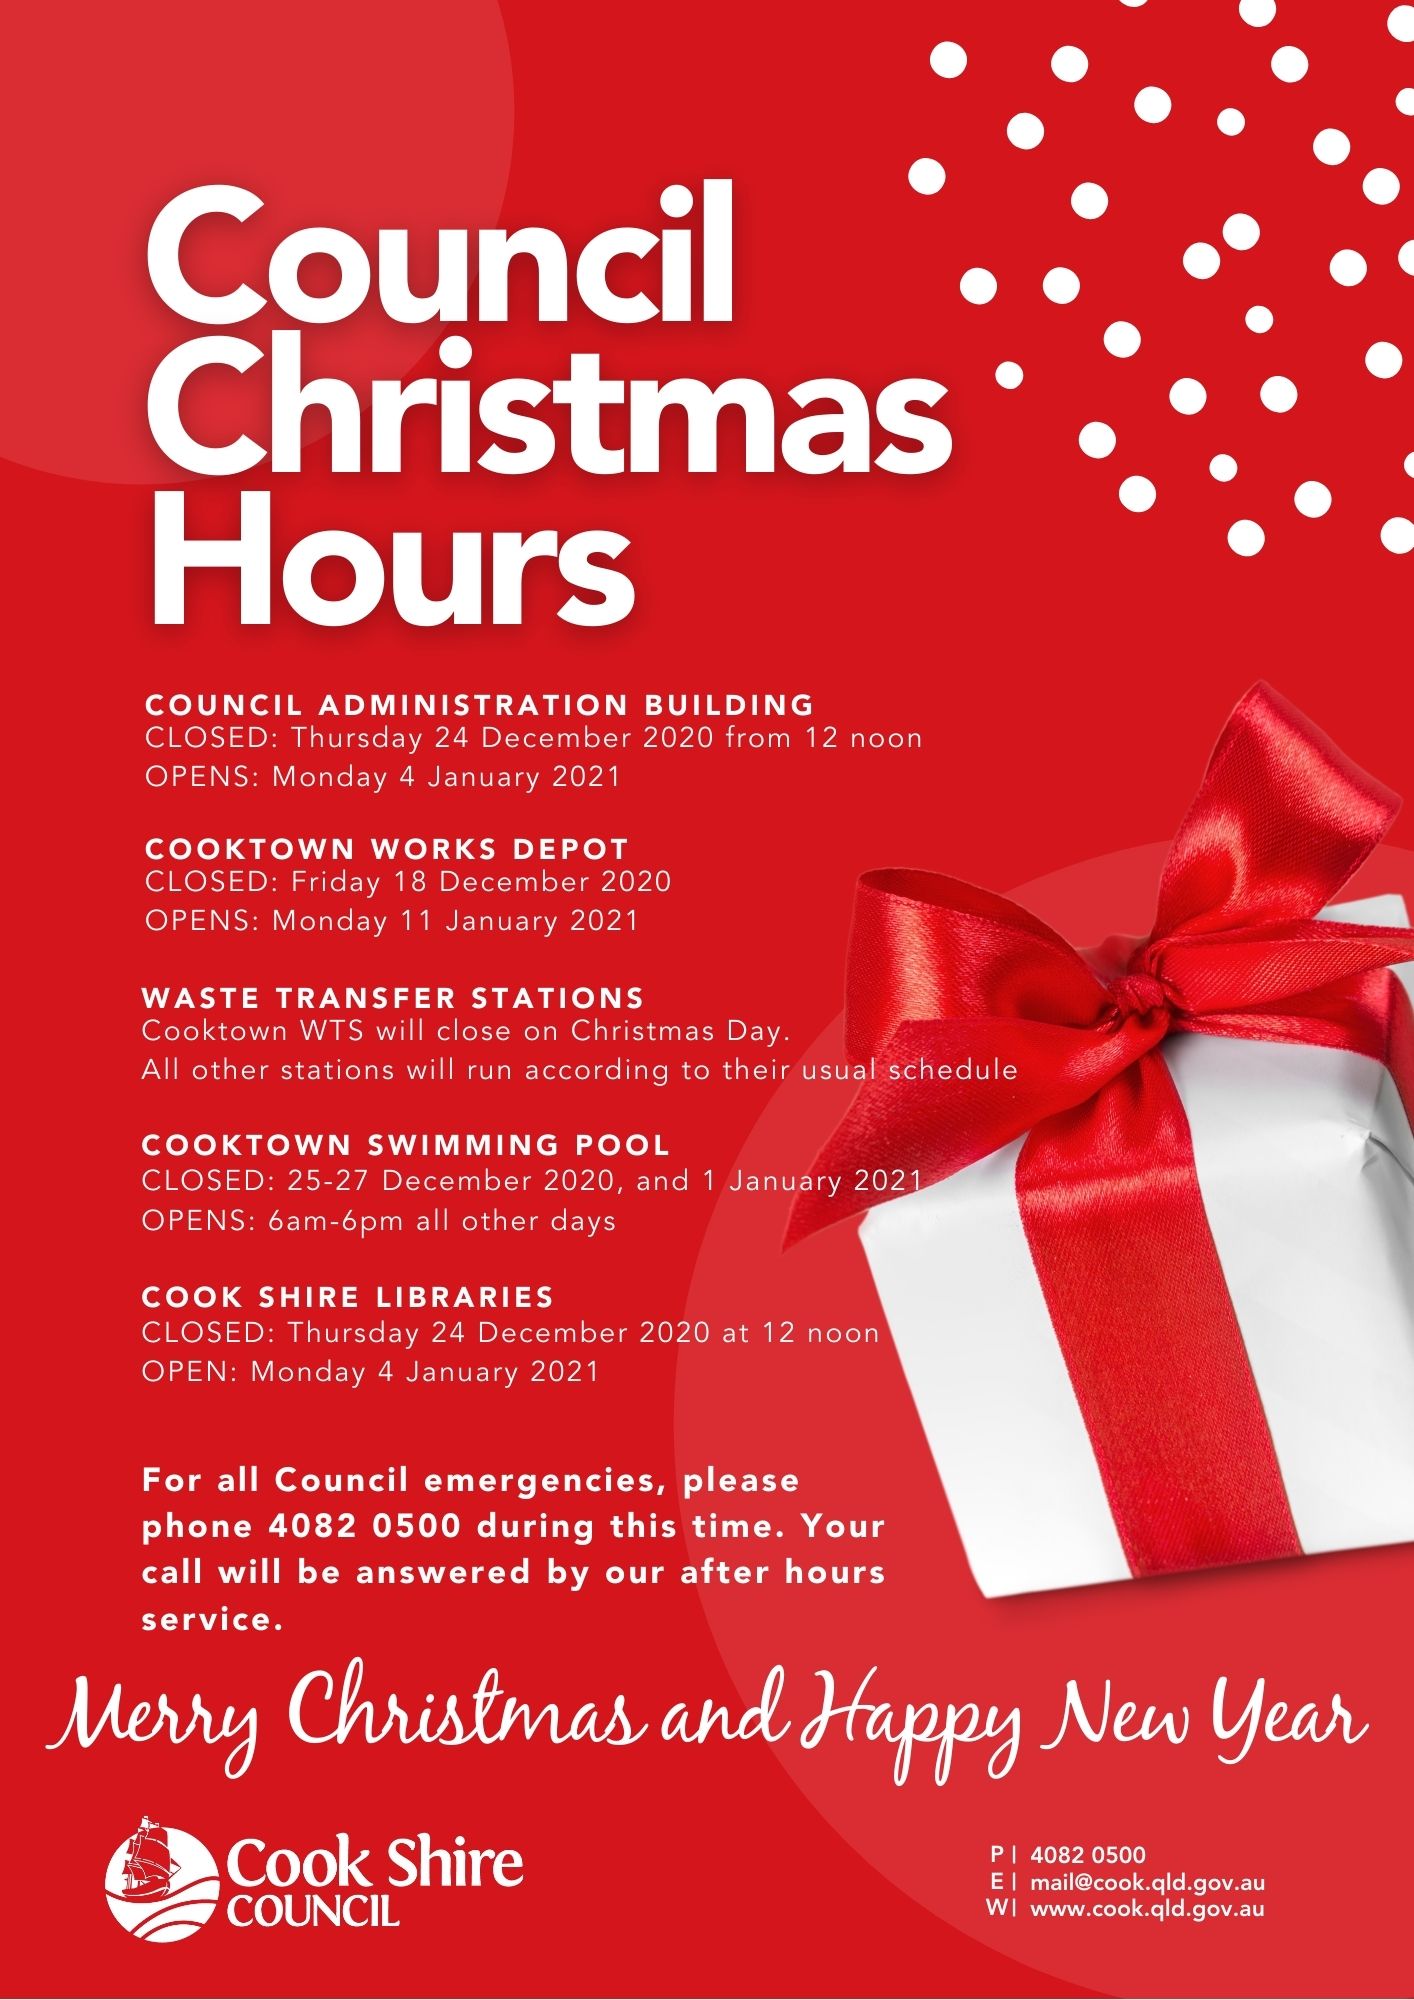 Council's Christmas Hours 2020